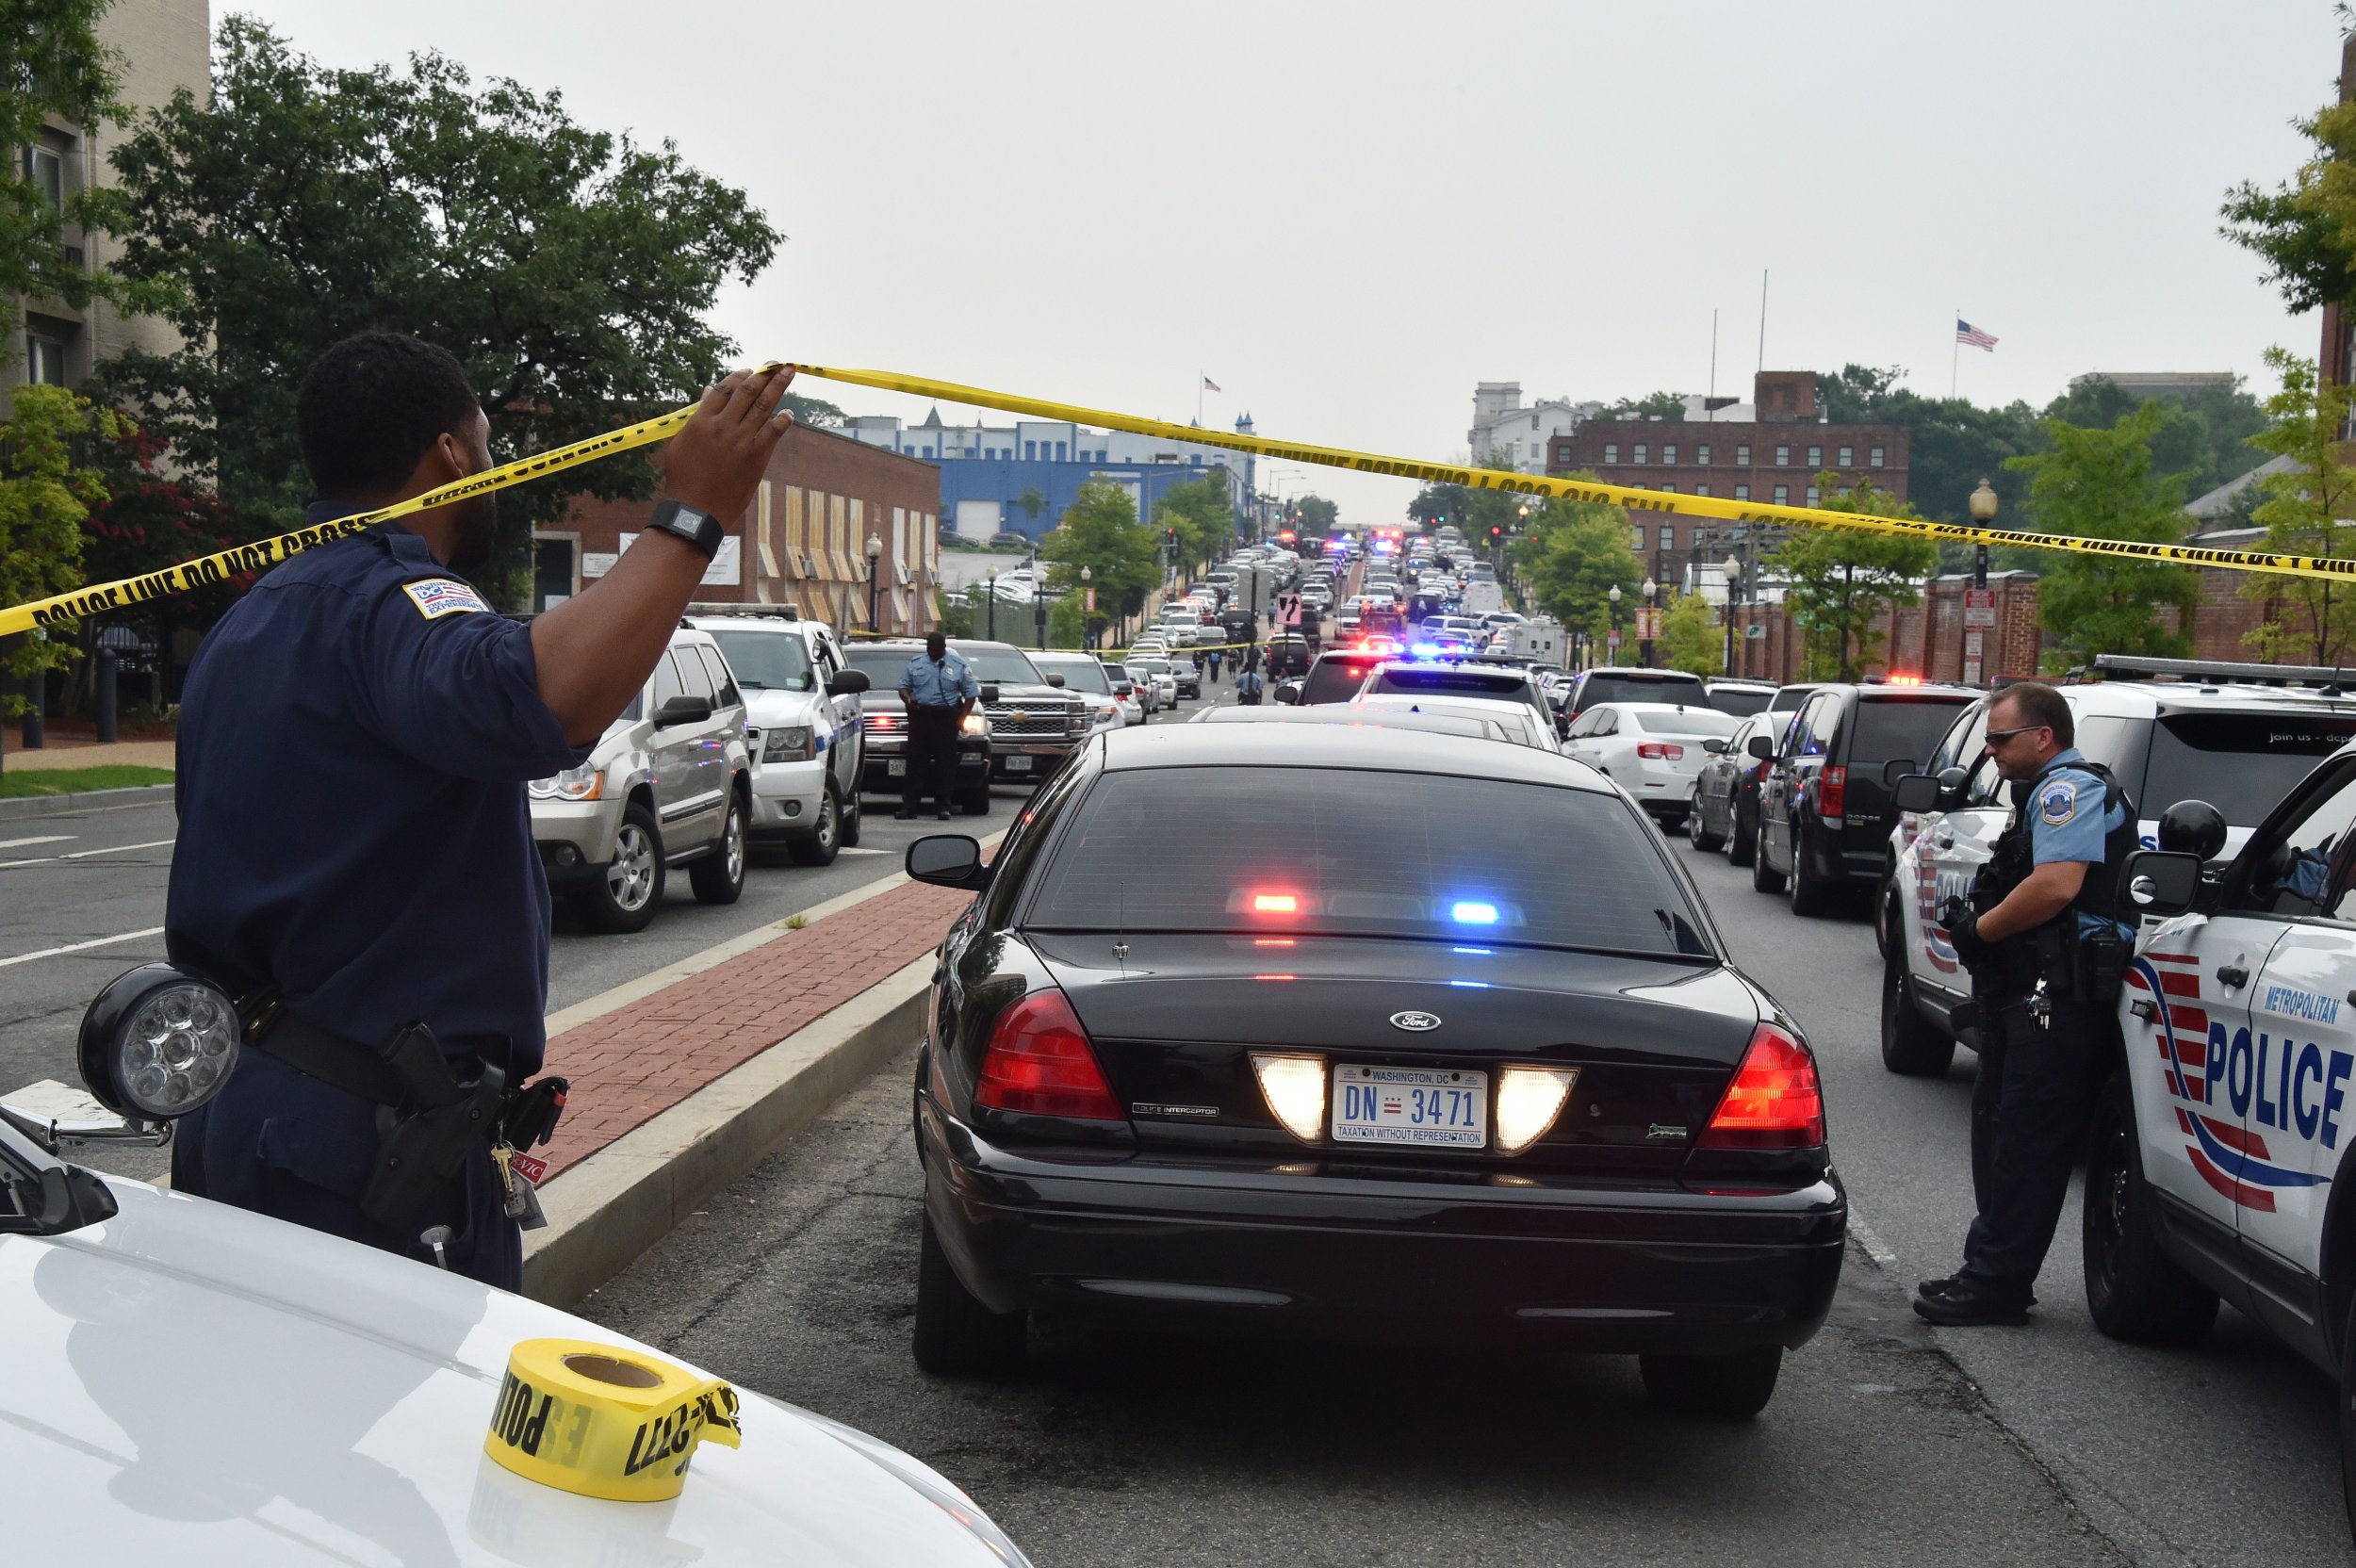 Washington DC Homicides Eclipse 2014 Total, As Police Launch 'All Hands